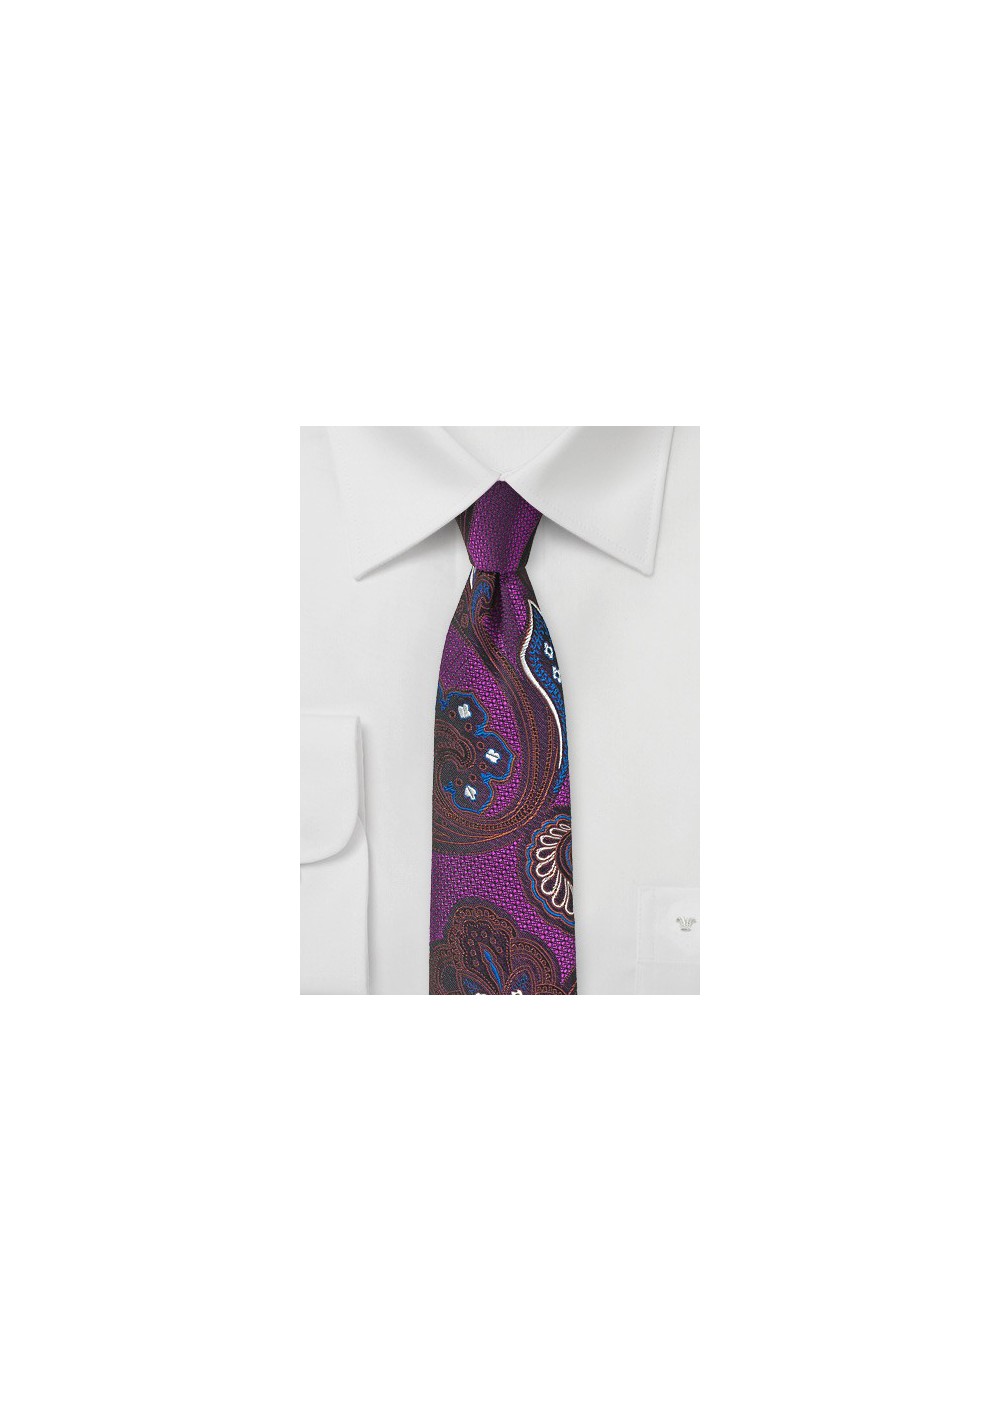 Psychedelic Paisley Tie in Violet, Red, and Blue